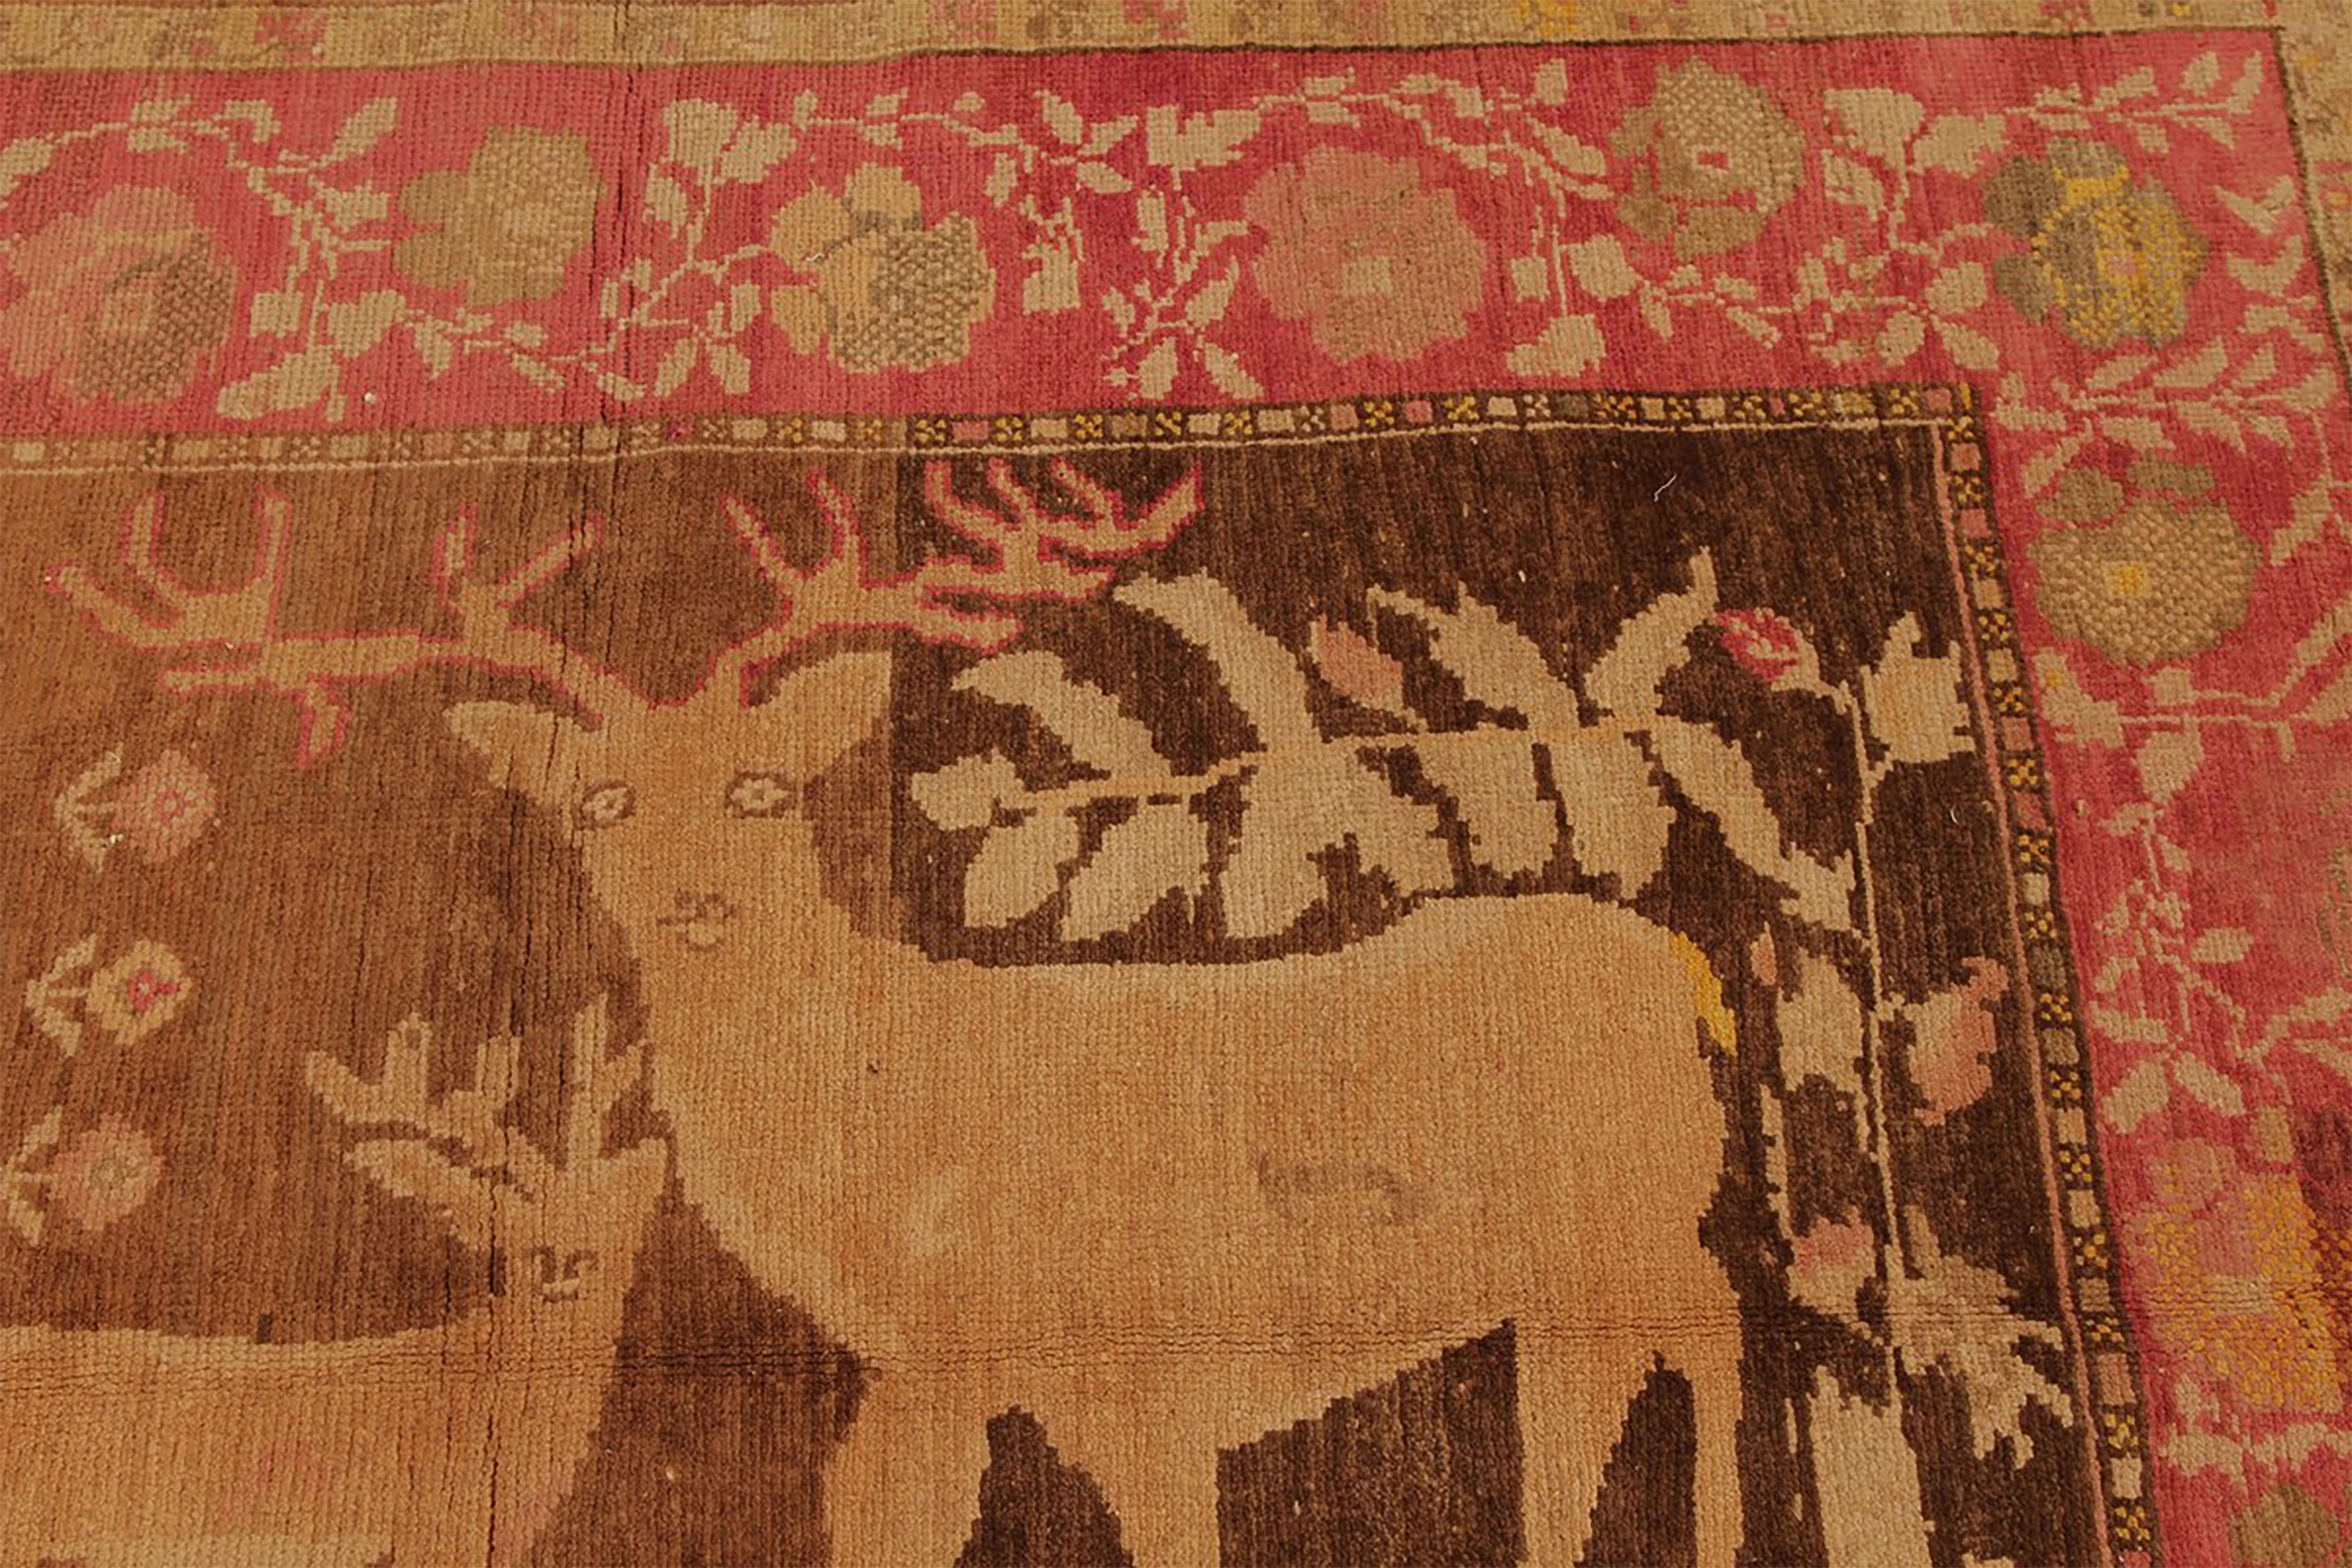 Hand knotted in Russia originating between 1890-1900, this antique Karabagh wool rug enjoys a stunning autumnal colorway complementing both the soft floral motifs and the regal deer pictorial in the border and field respectively. The light accents